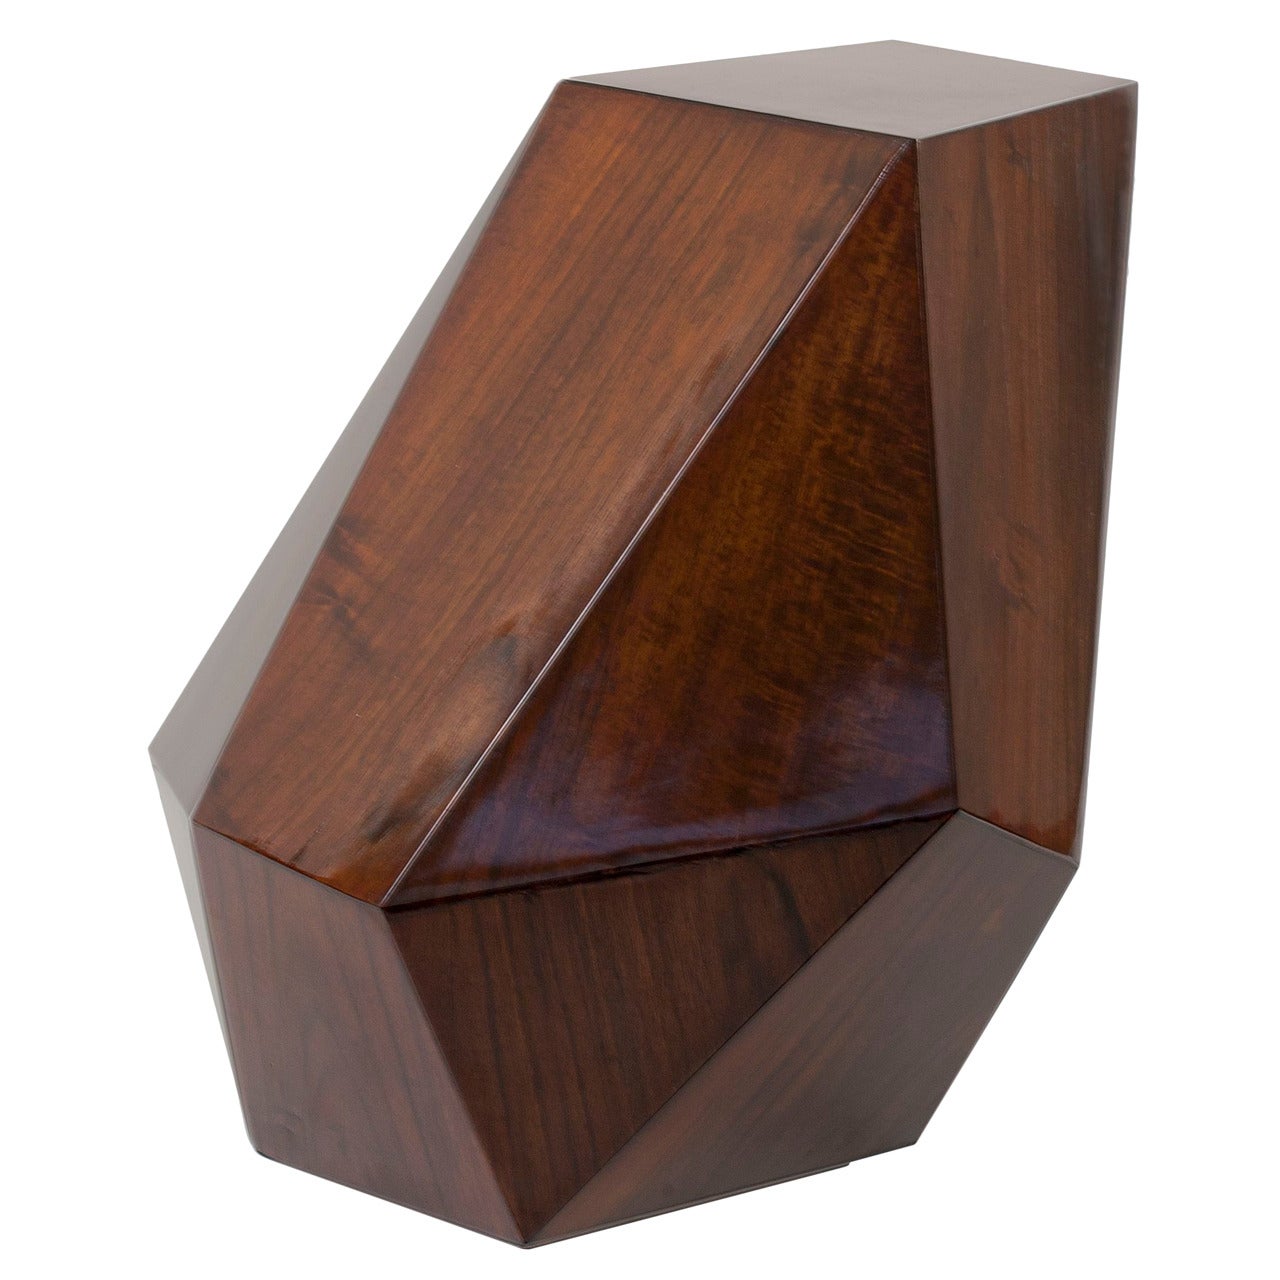 Emerald, Achille Salvagni’s multifaceted side table, is an incredibly functional, ultra-chic accompaniment to any seating arrangement. It is available in a number of finishes and mediums, including stained Lauro, lacquered oak, and polished